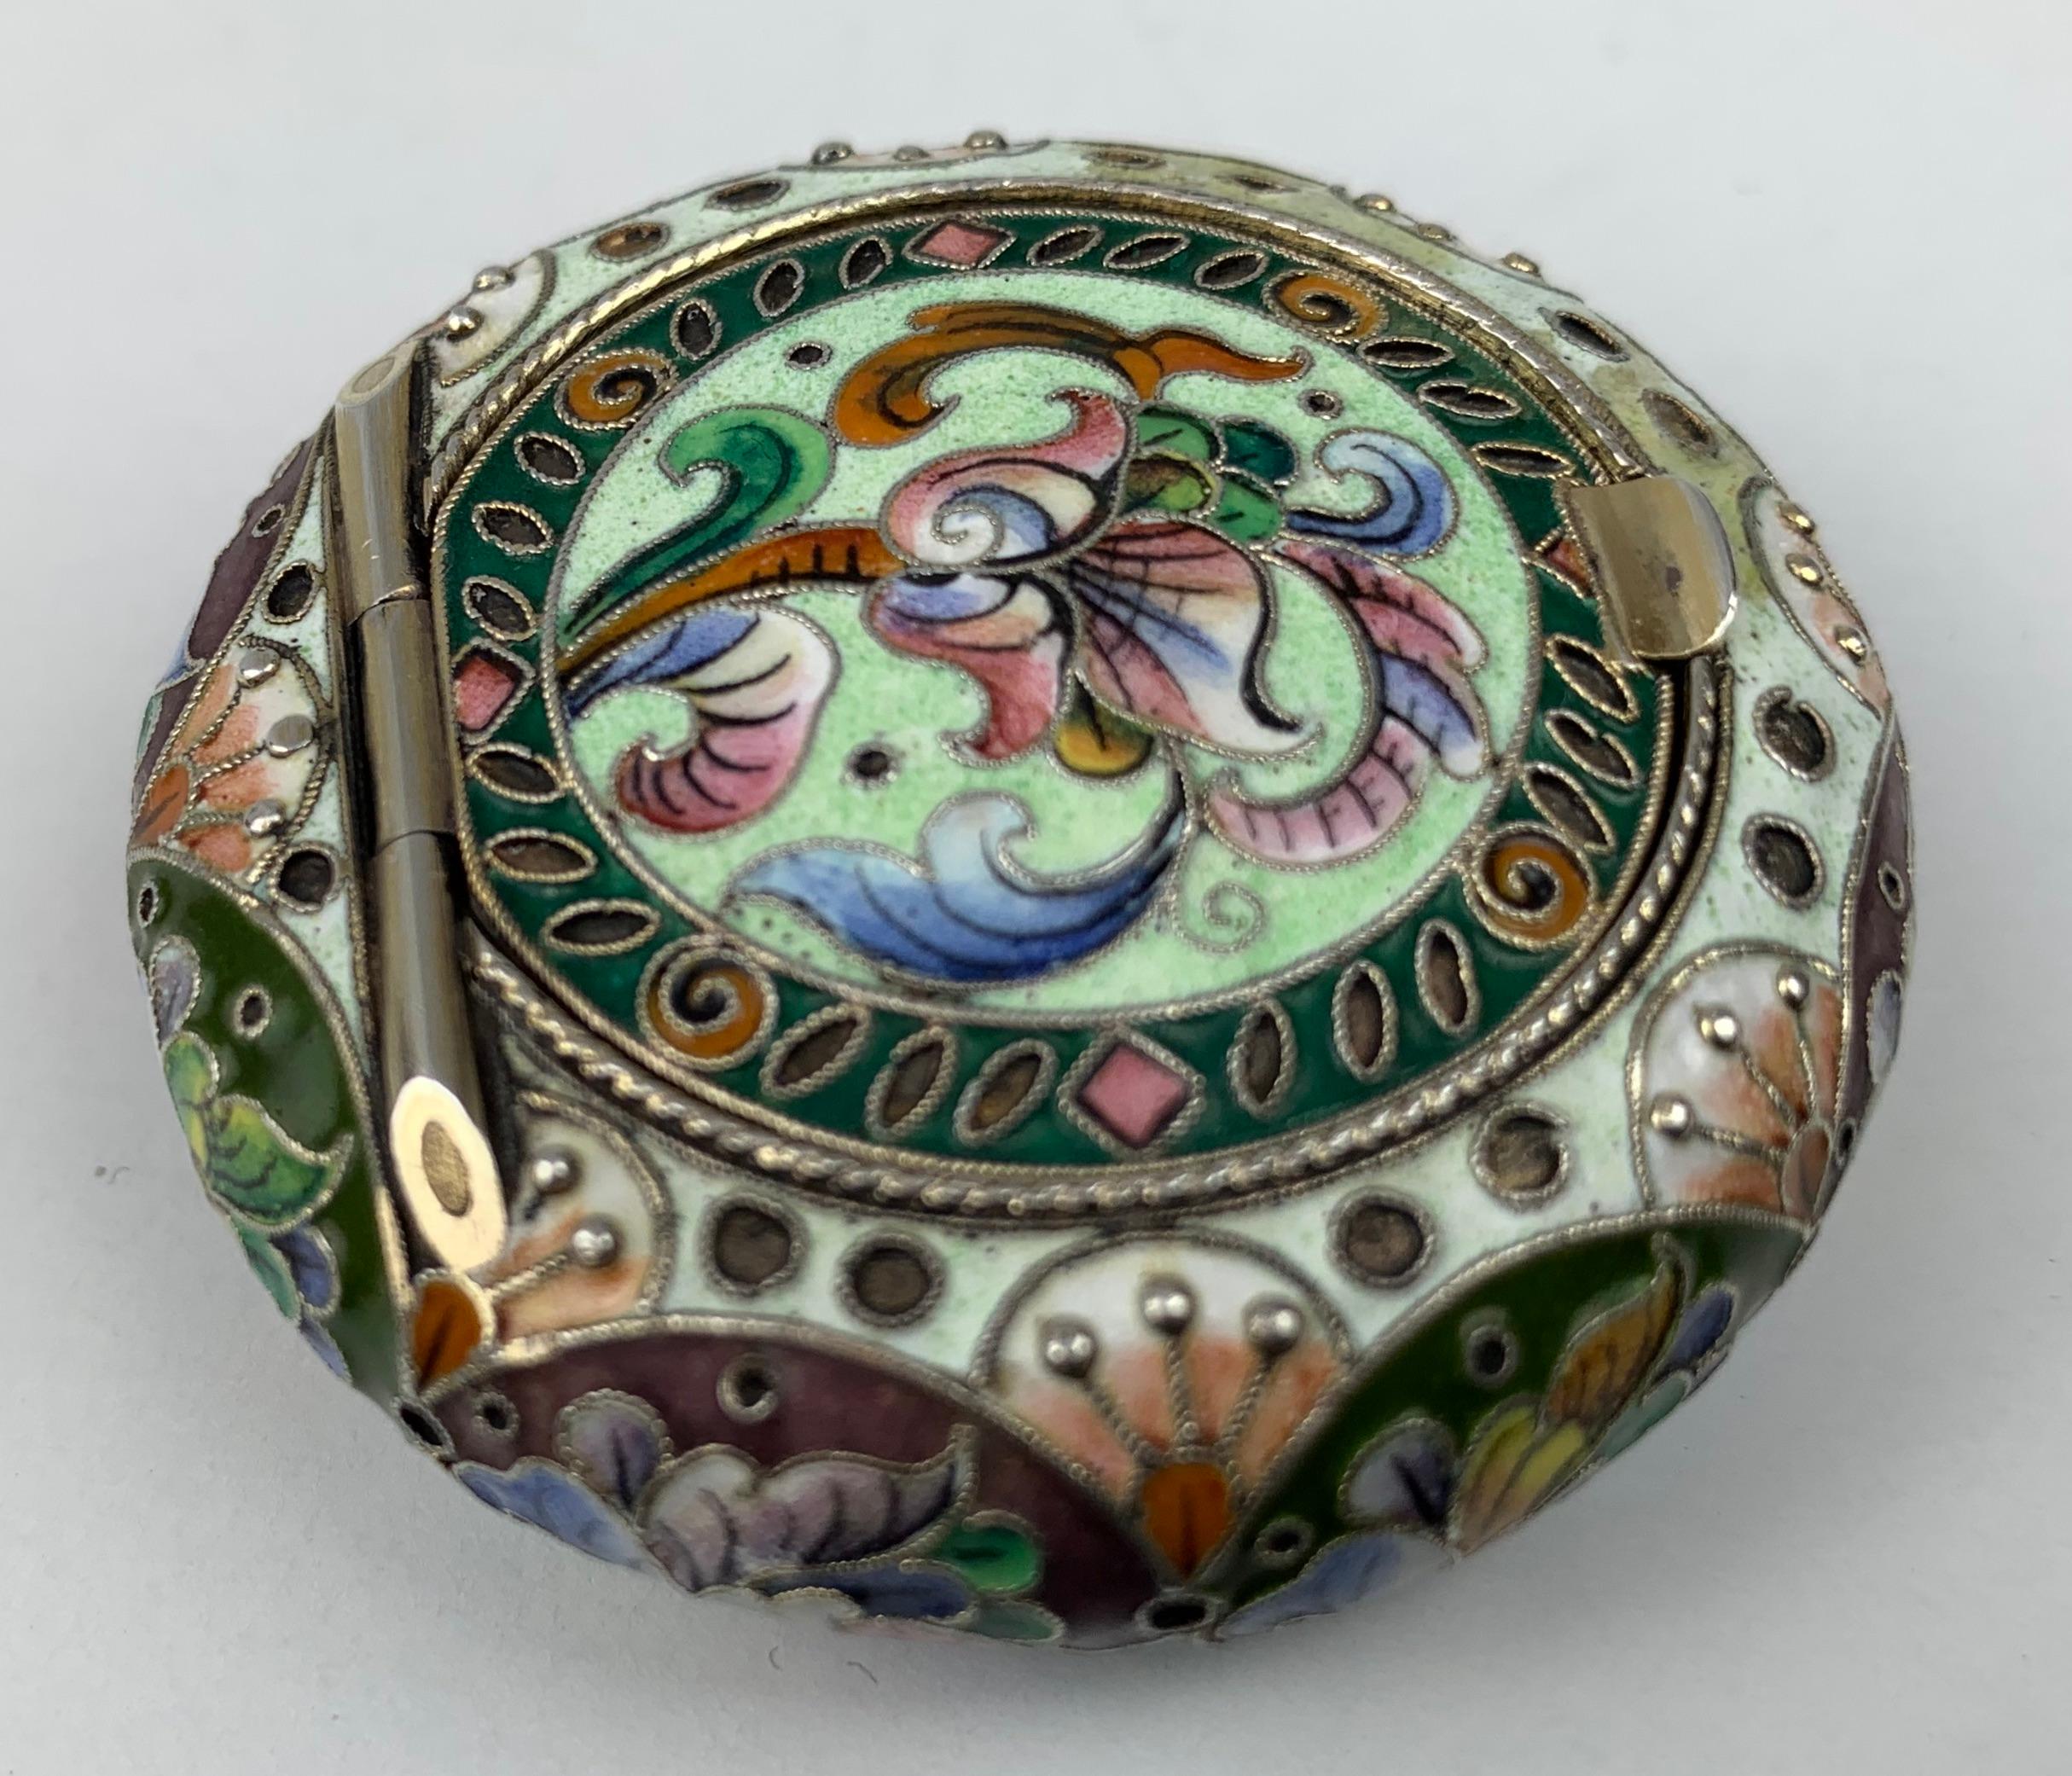 Cushion Shaped Solid Silver Pill Box, Imperial Russian Polychromed Enamel  1